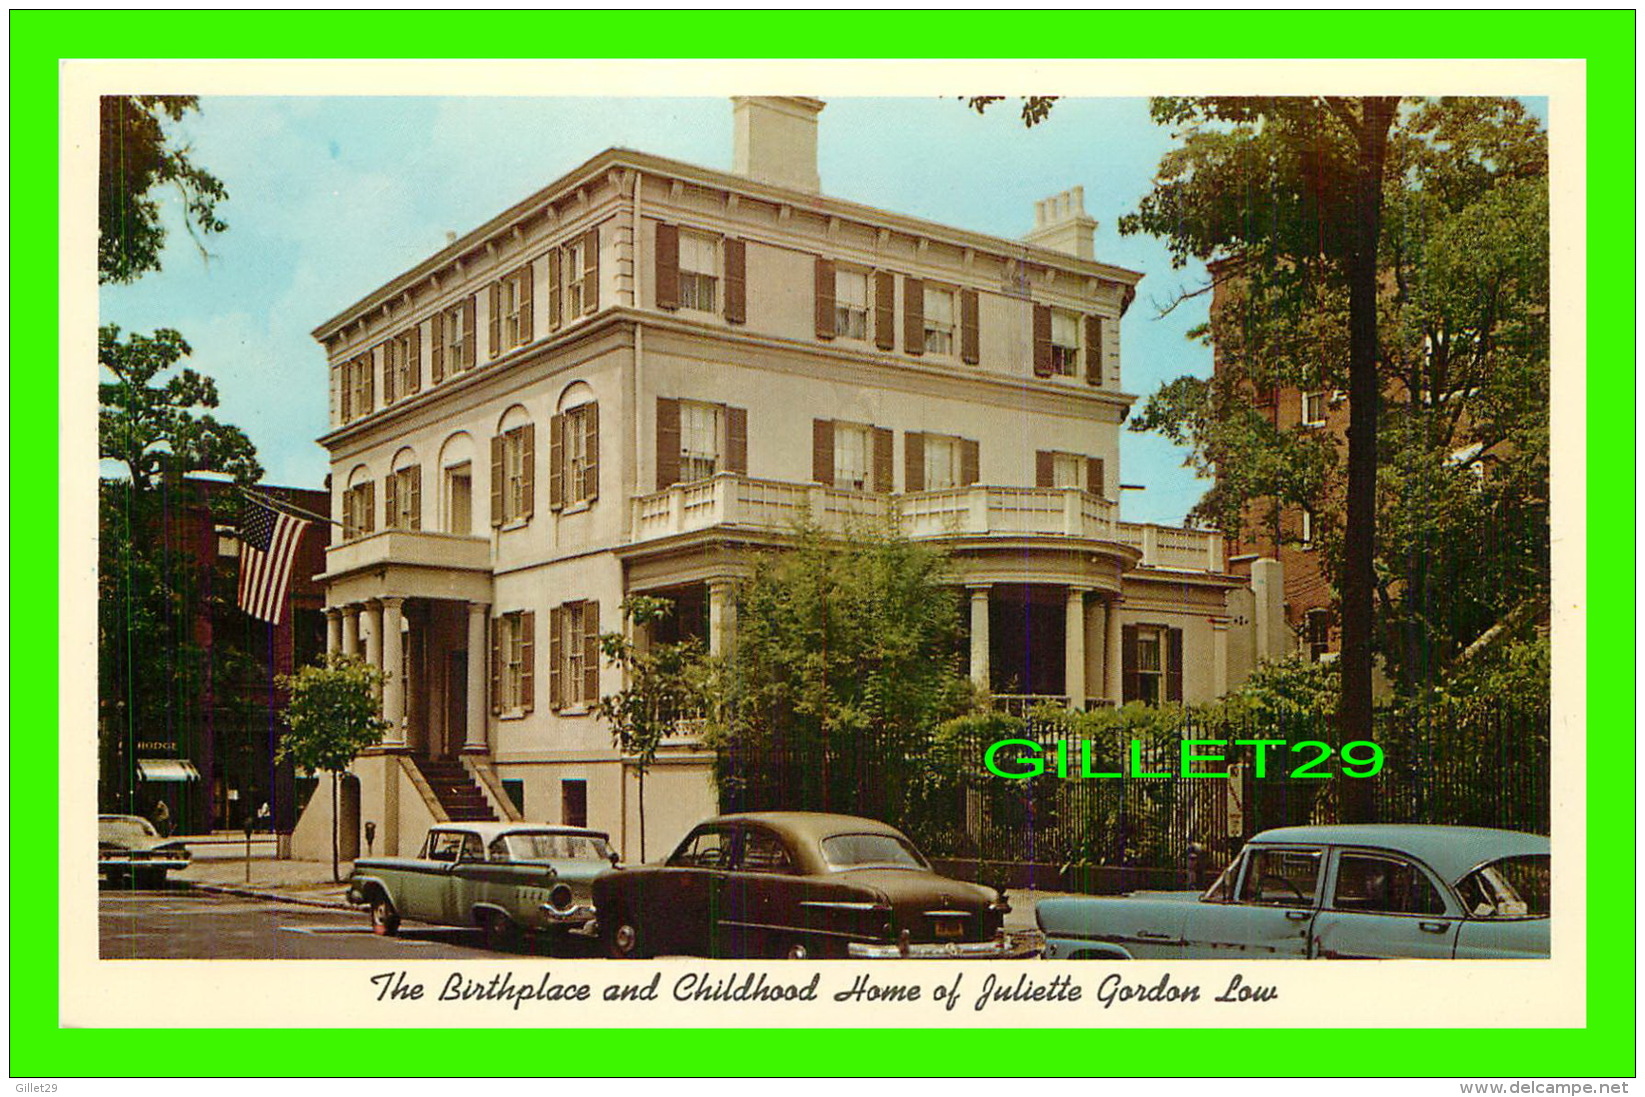 SAVANNAH, GE - THE BIRTHPLACE AND CHILDHOOD HOME OF JULIETTE GORDON LOW - ANIMATED WITH OLD CARS - DIXIE NEWS CO - - Savannah